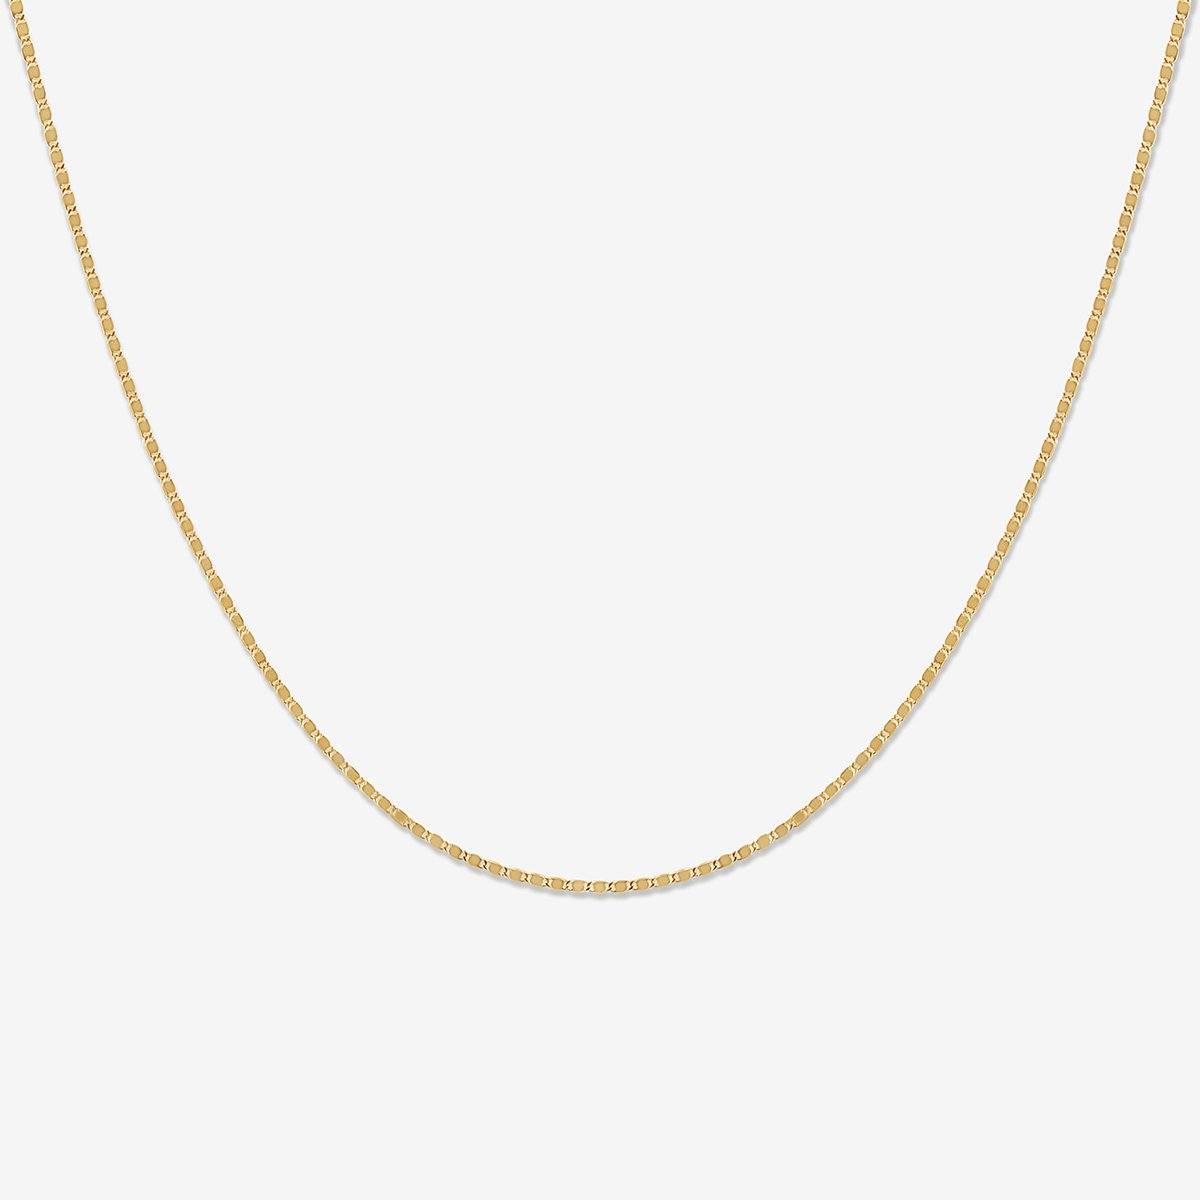 Solid Gold Flat Curb Chain Necklace | Apparel & Accessories Jewelry - KEMMI  Collection